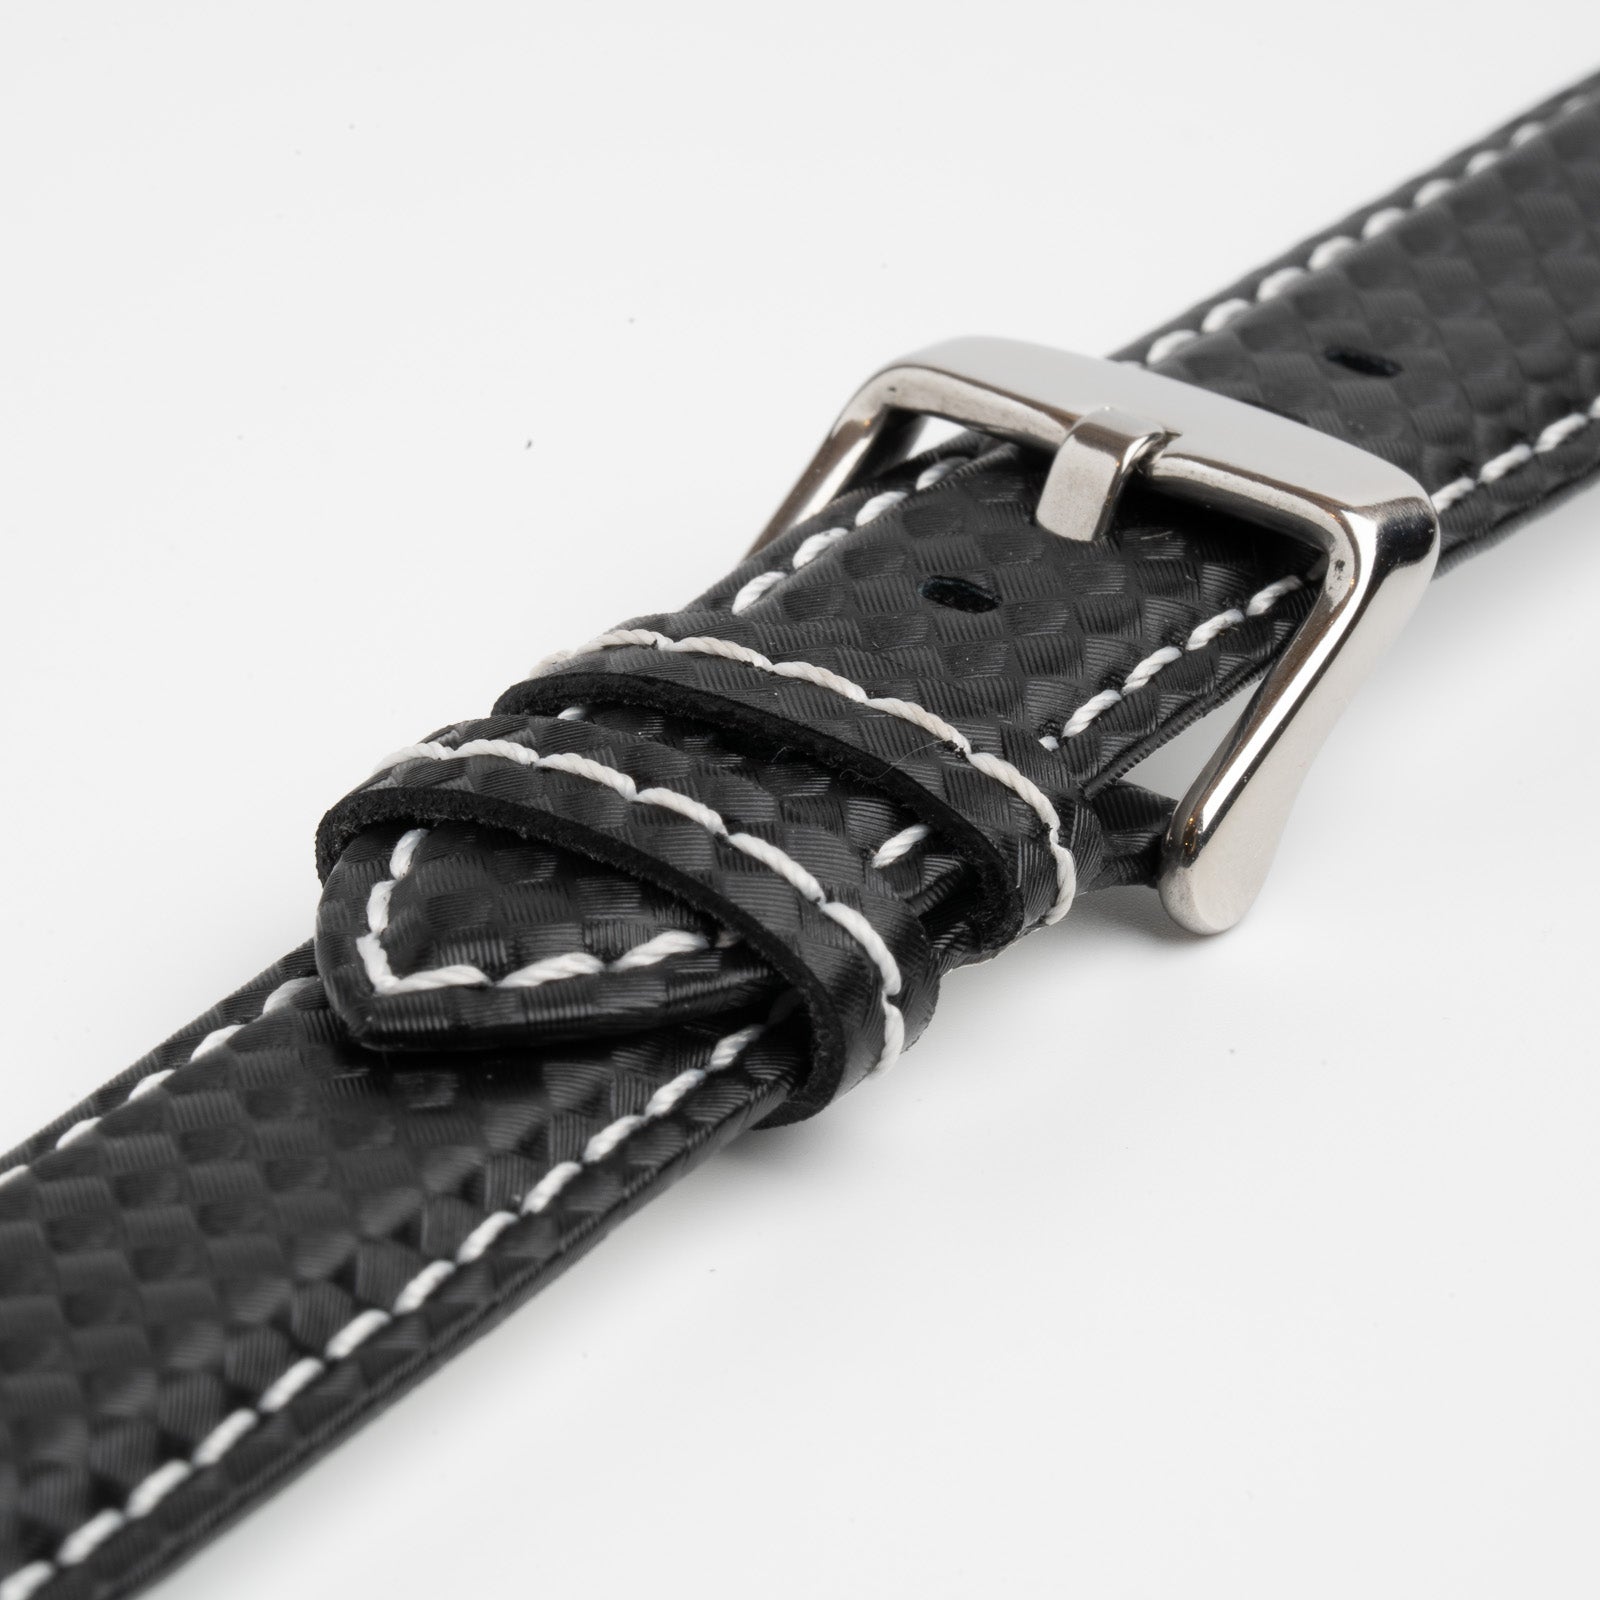 Anthracite Carbon White Watch Strap